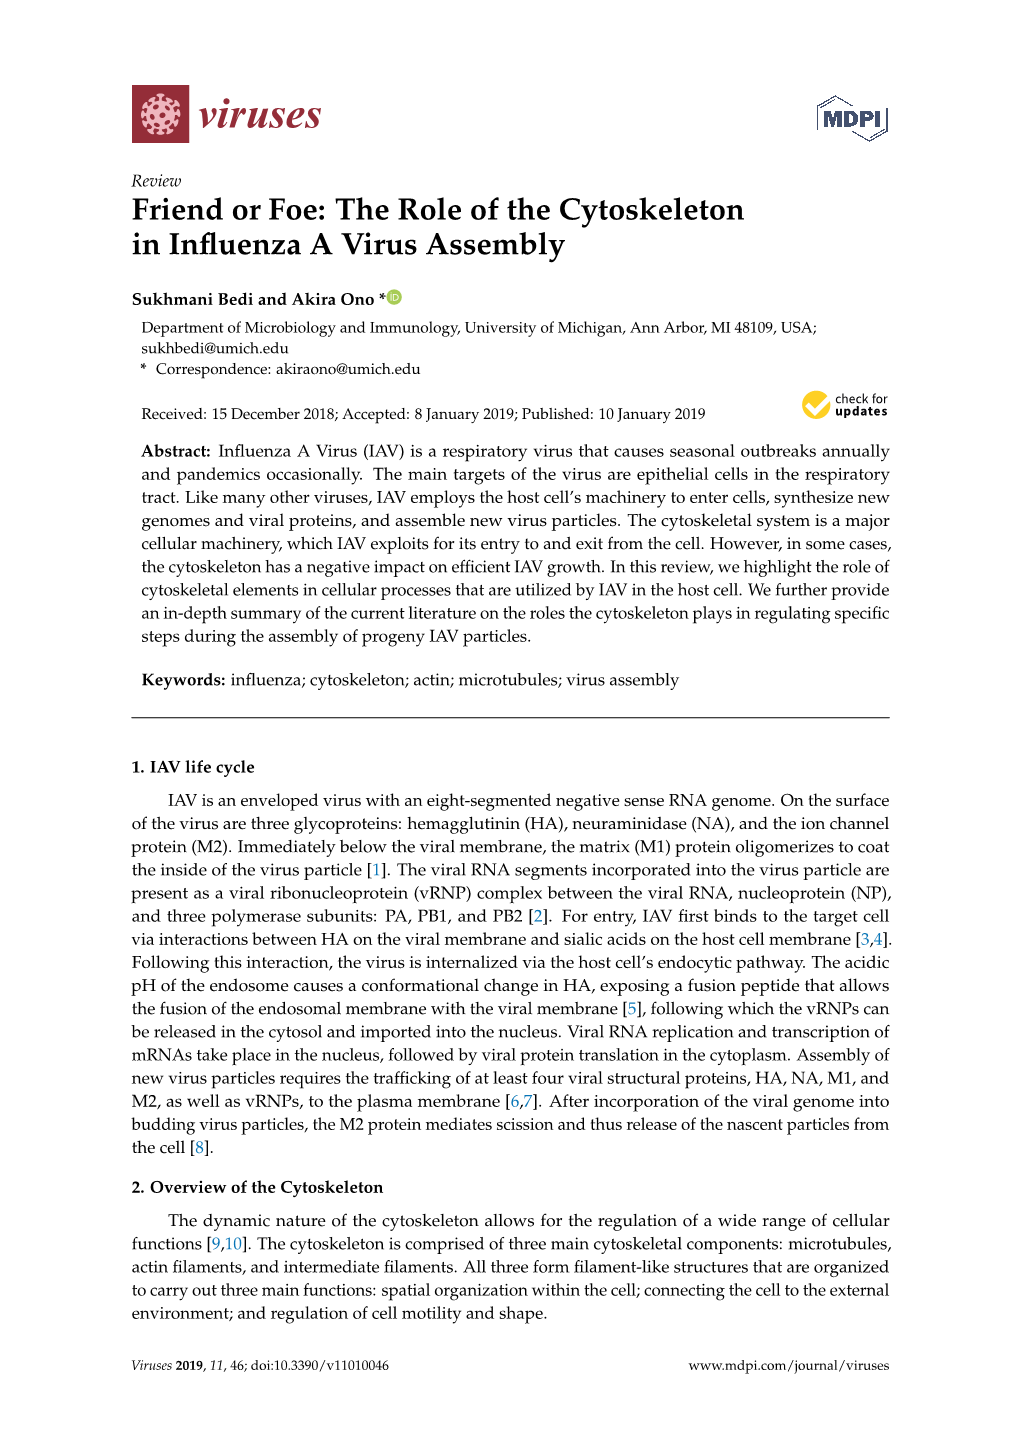 The Role of the Cytoskeleton in Influenza a Virus Assembly